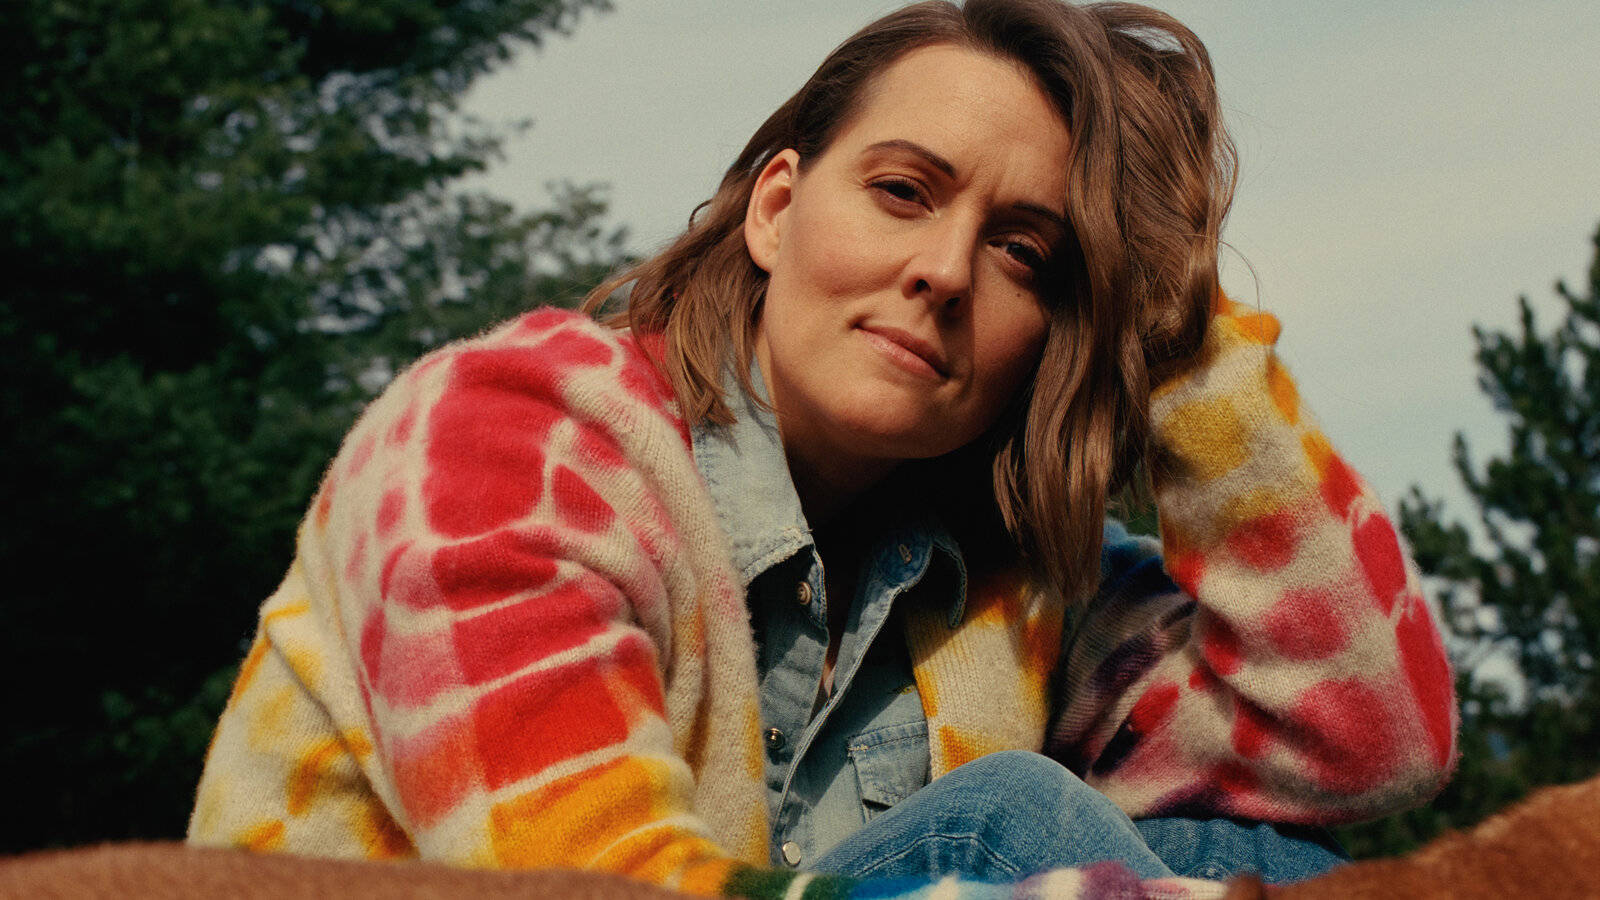 Brandi Carlile Looking Captivating In A Tie-dyed Shirt